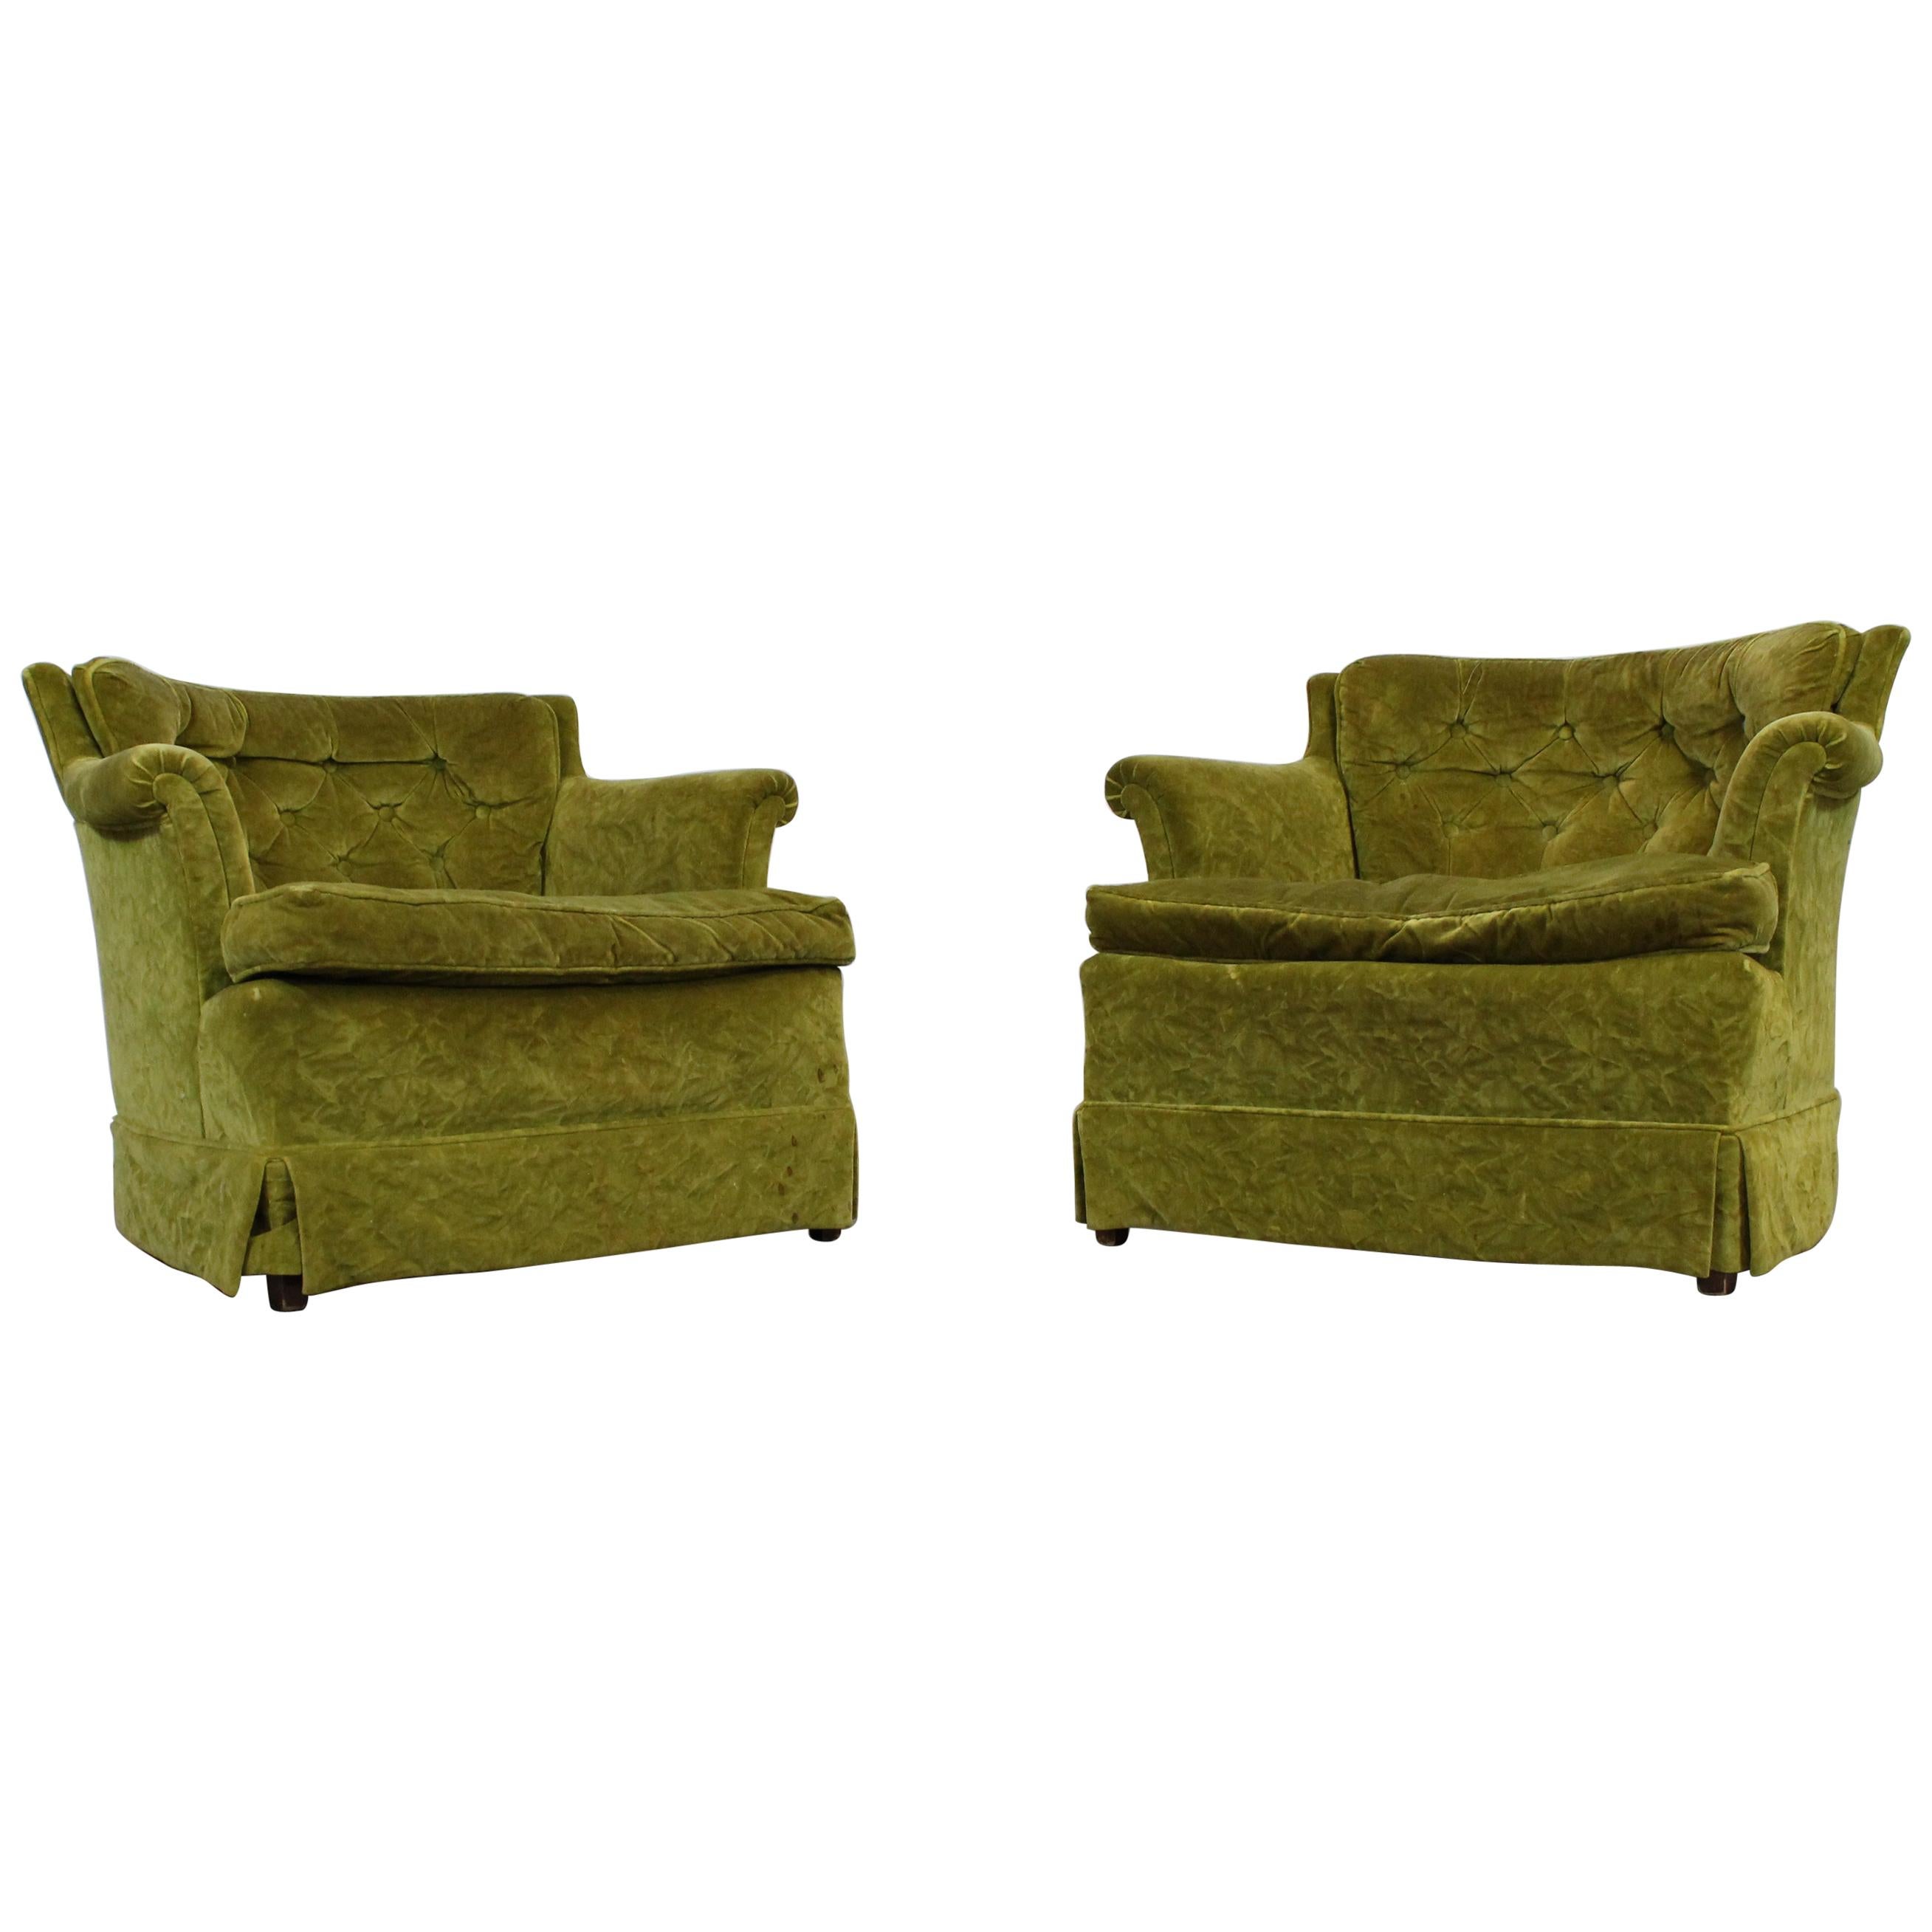 Pair of Mid-Century Modern Tufted Club Chairs